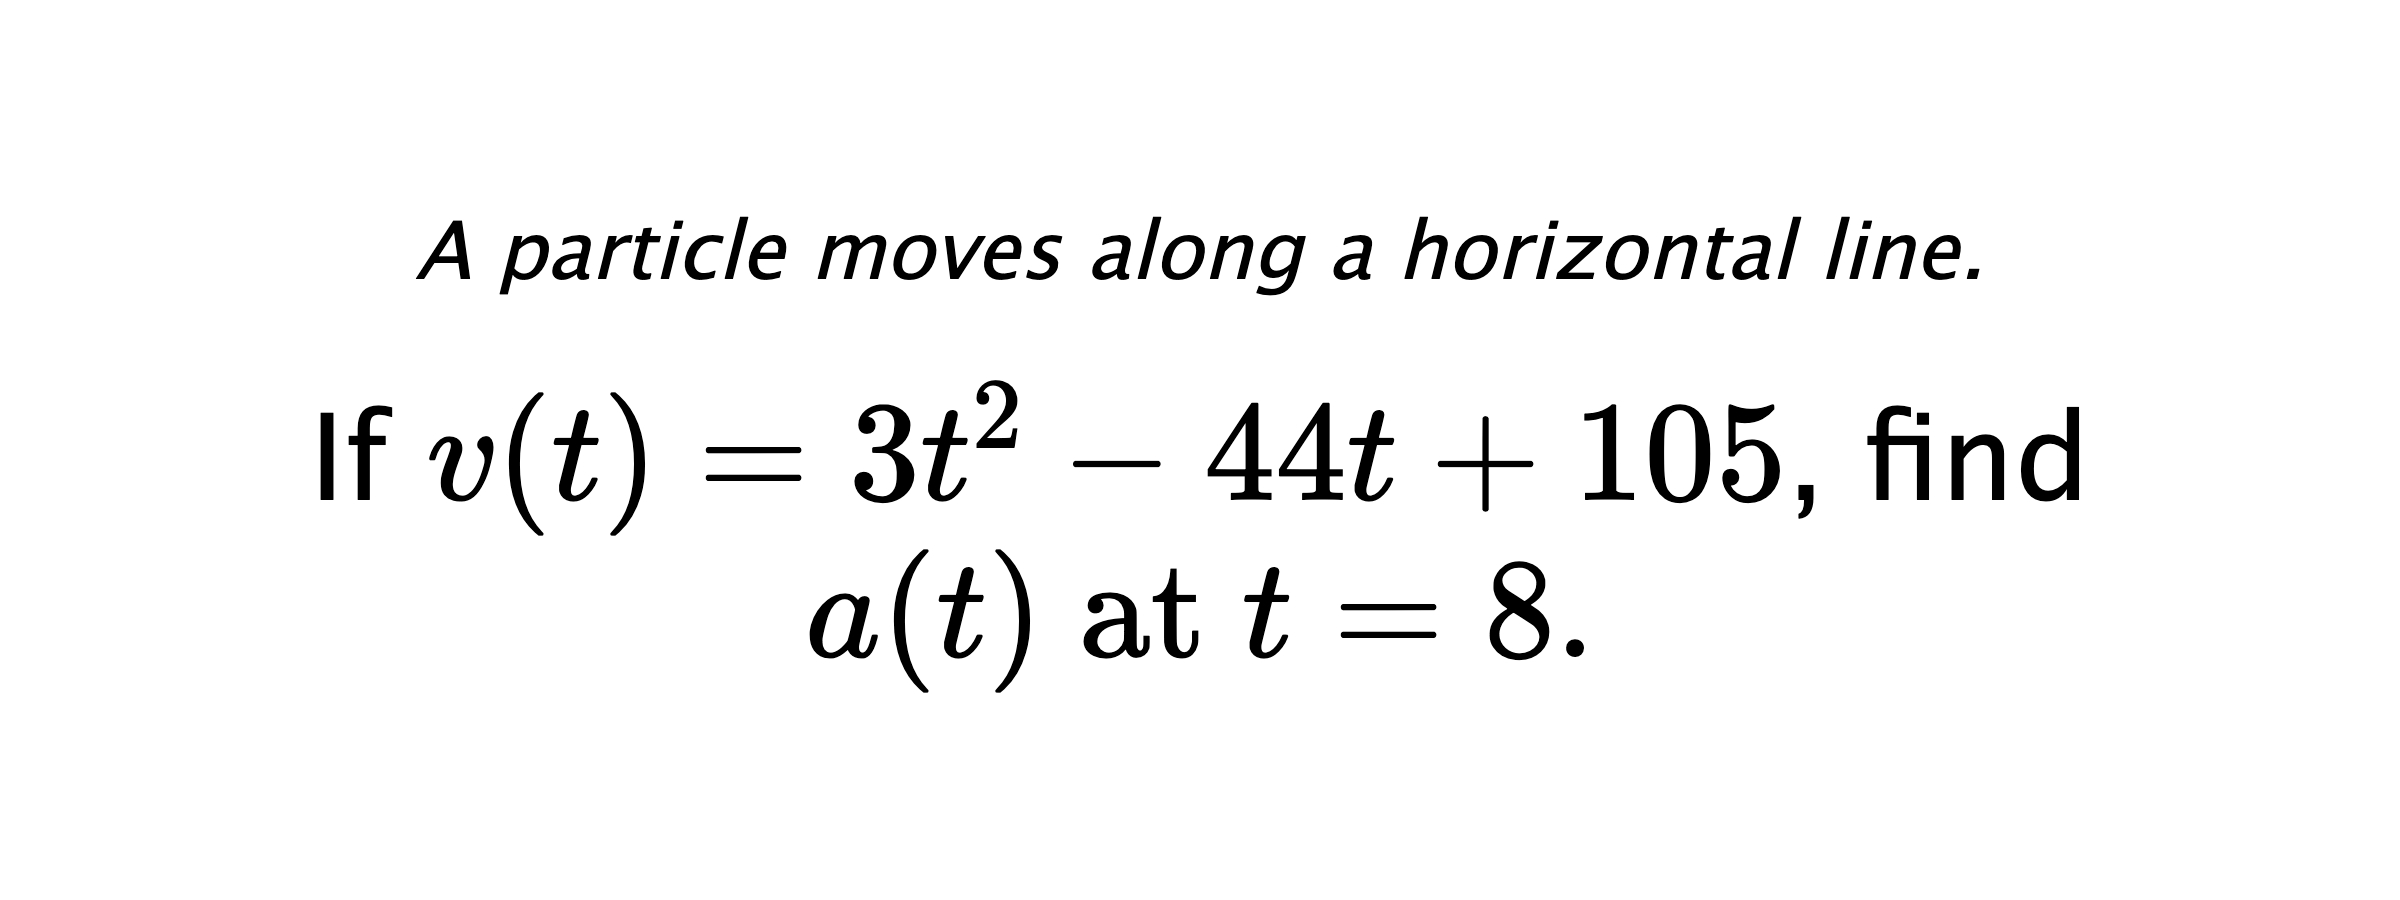 A particle moves along a horizontal line. If $ v(t)=3t^2-44t+105 $, find $ a(t) \text{ at } t=8. $